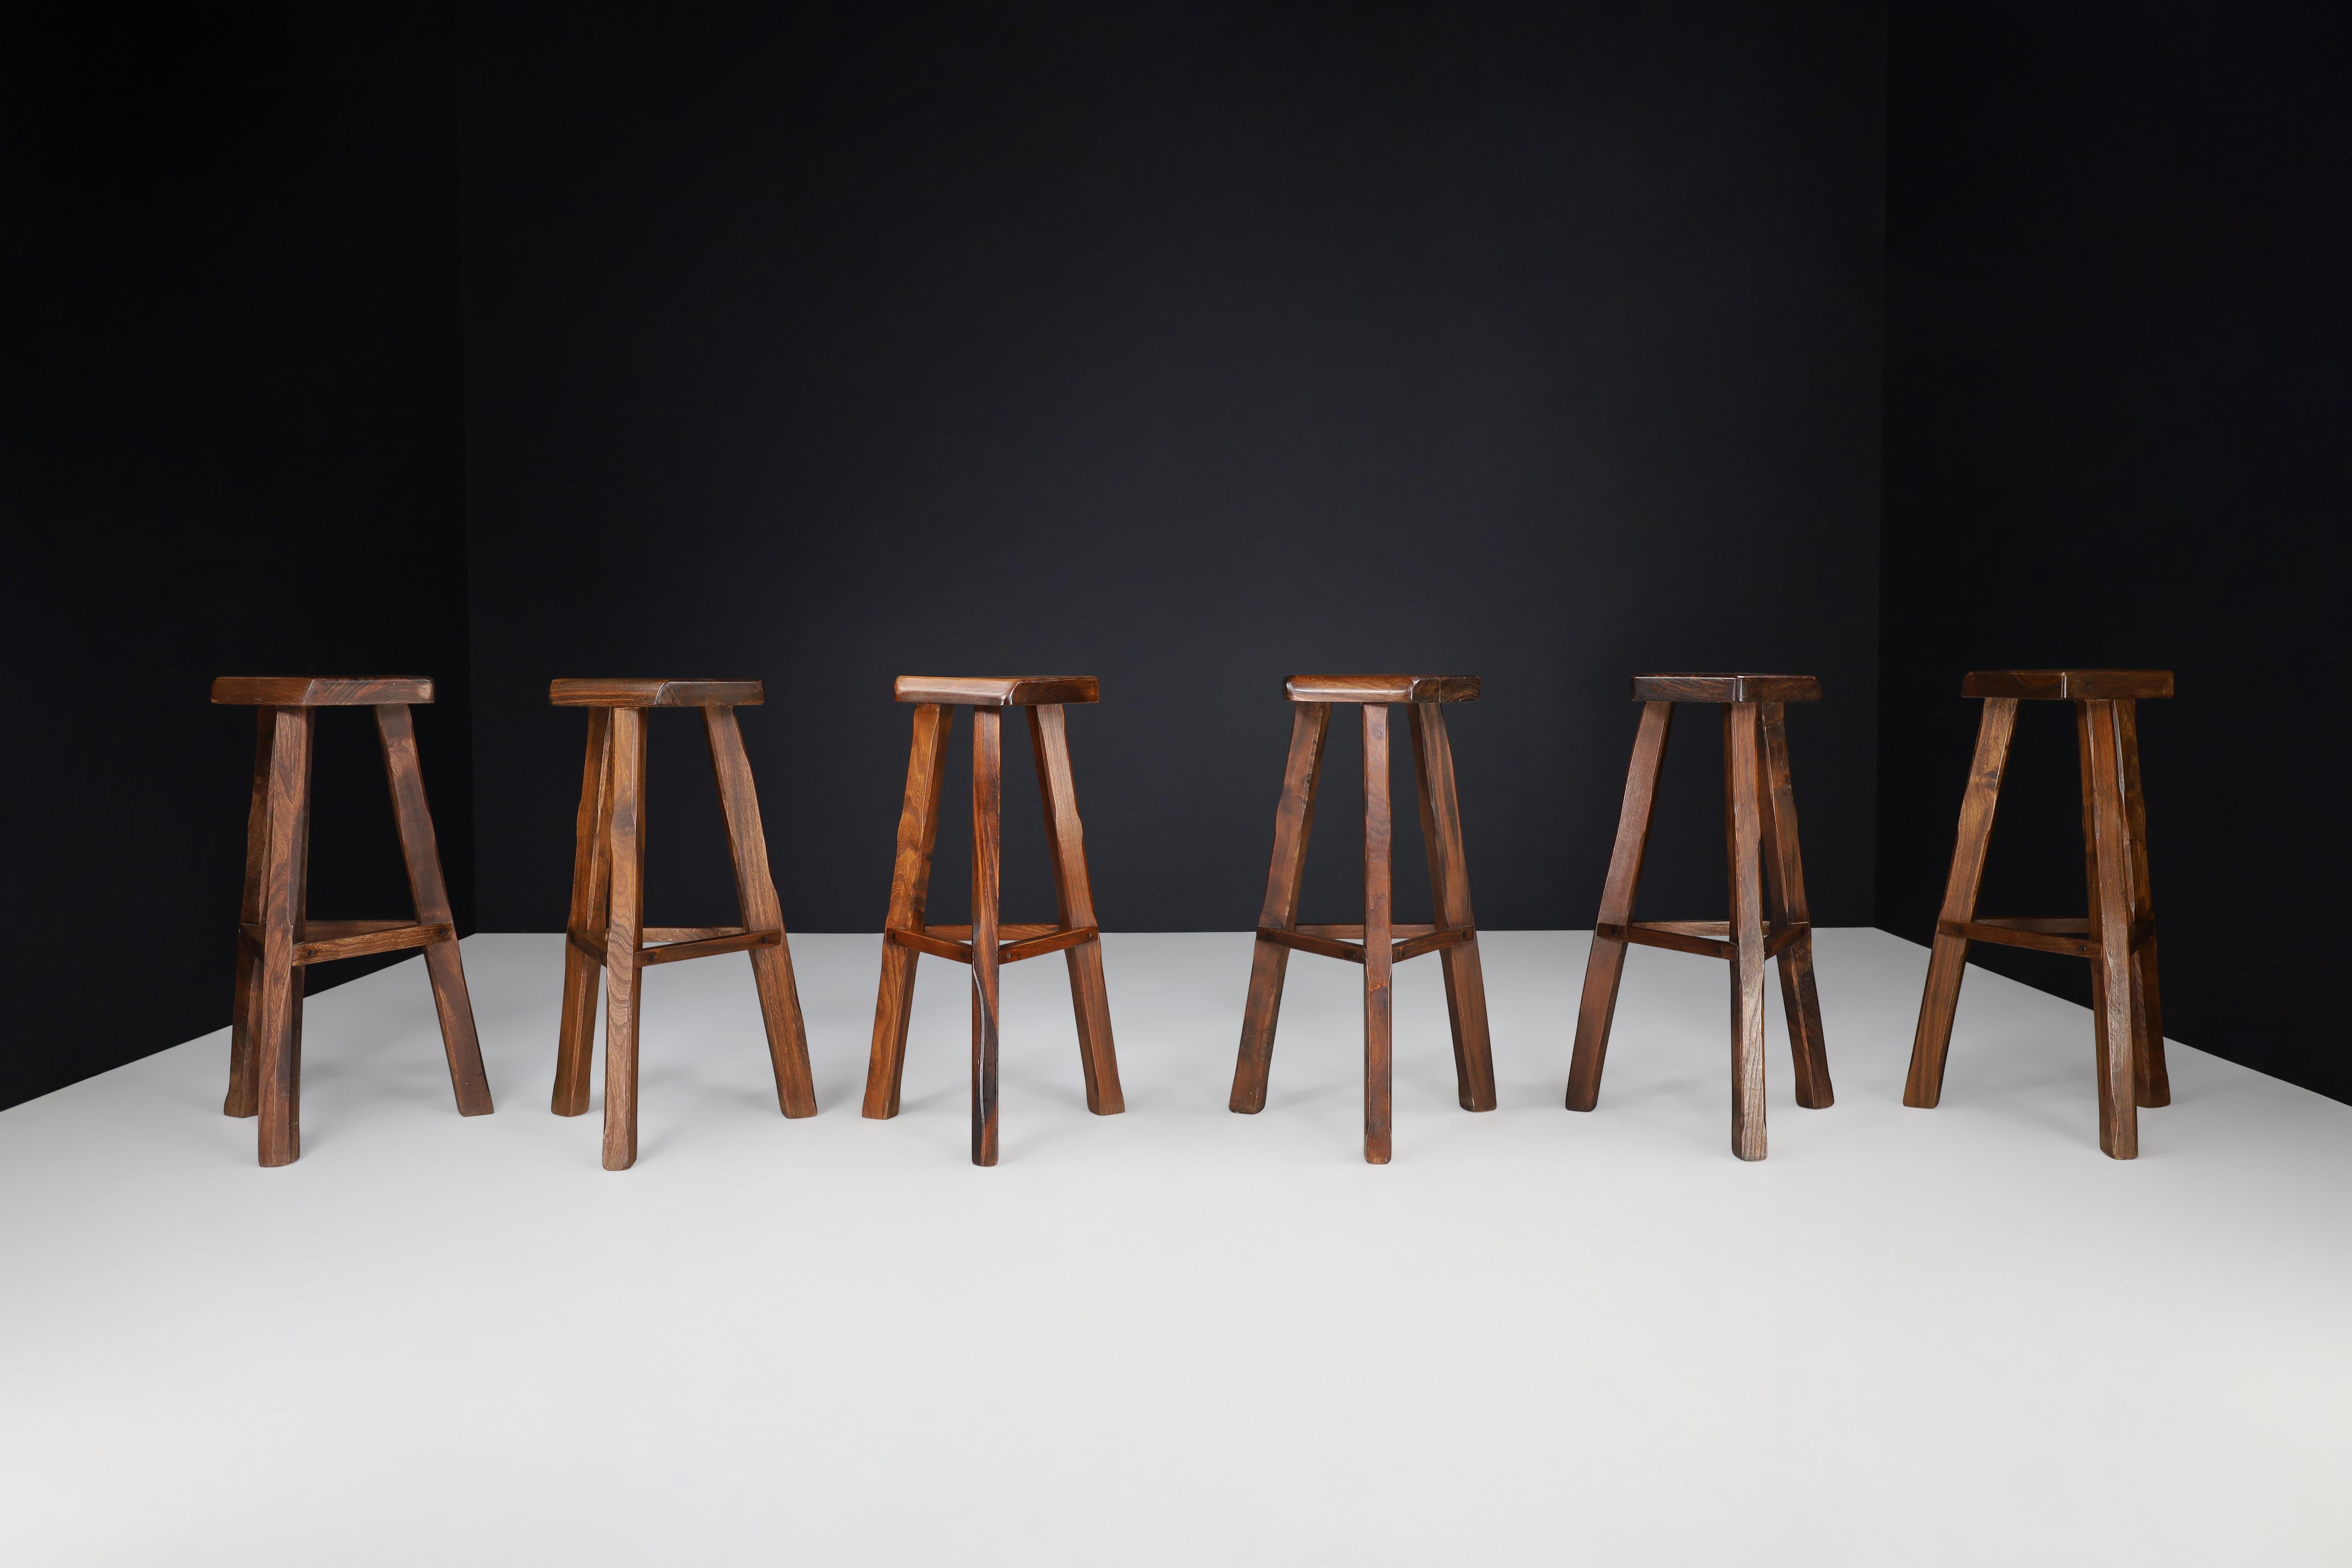 Olavi Hänninen Brutalist Elm Wood Bar Stools, Finland 1960s 

These set of 6 bar stools, crafted by Finnish designer Olavi Hänninen in the 1960s, boast unique warm tones due to their dark stained Elm wood construction. Hand-carved with precision,